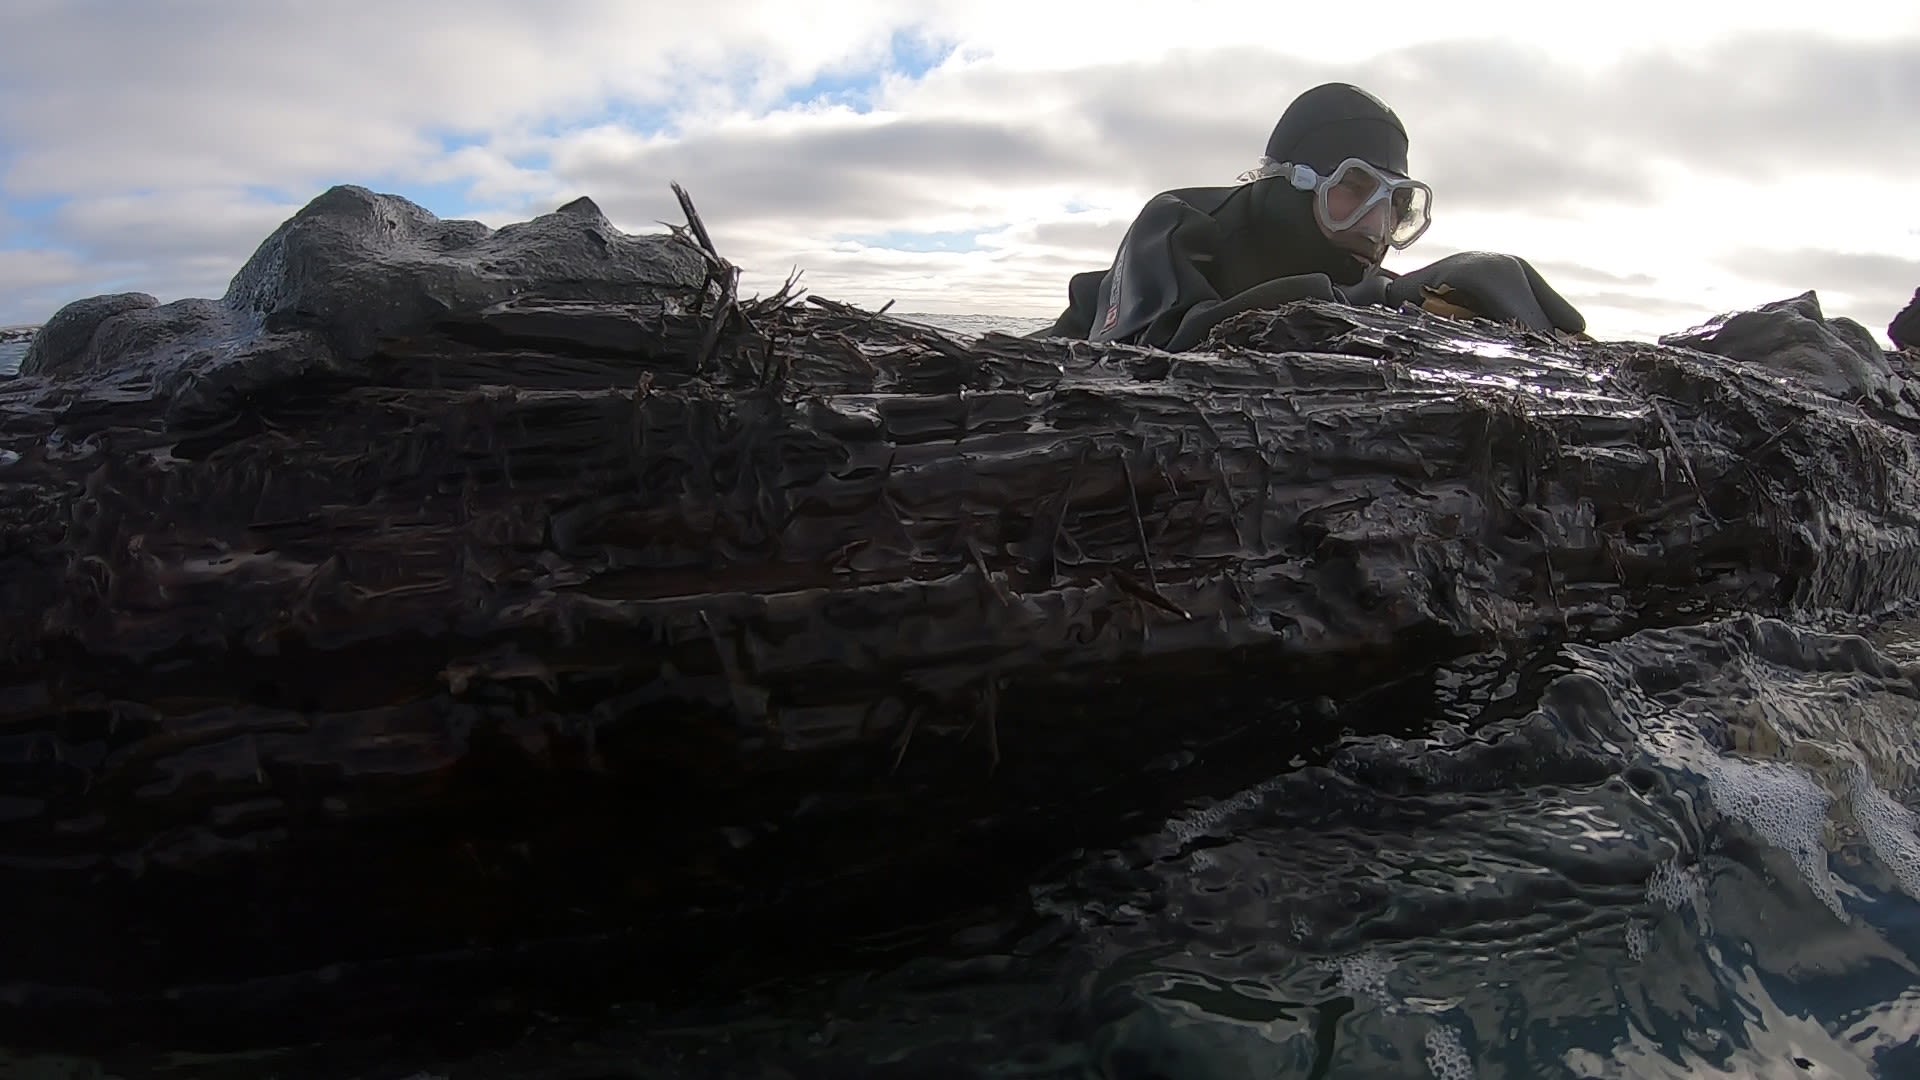 Trevor Croft, also from the Clean Harbours Initiative, attempts to secure parts of the shipwreck to keep it from breaking up in the rough waters off the coast of Cape Ray, Newfoundland, Canada.